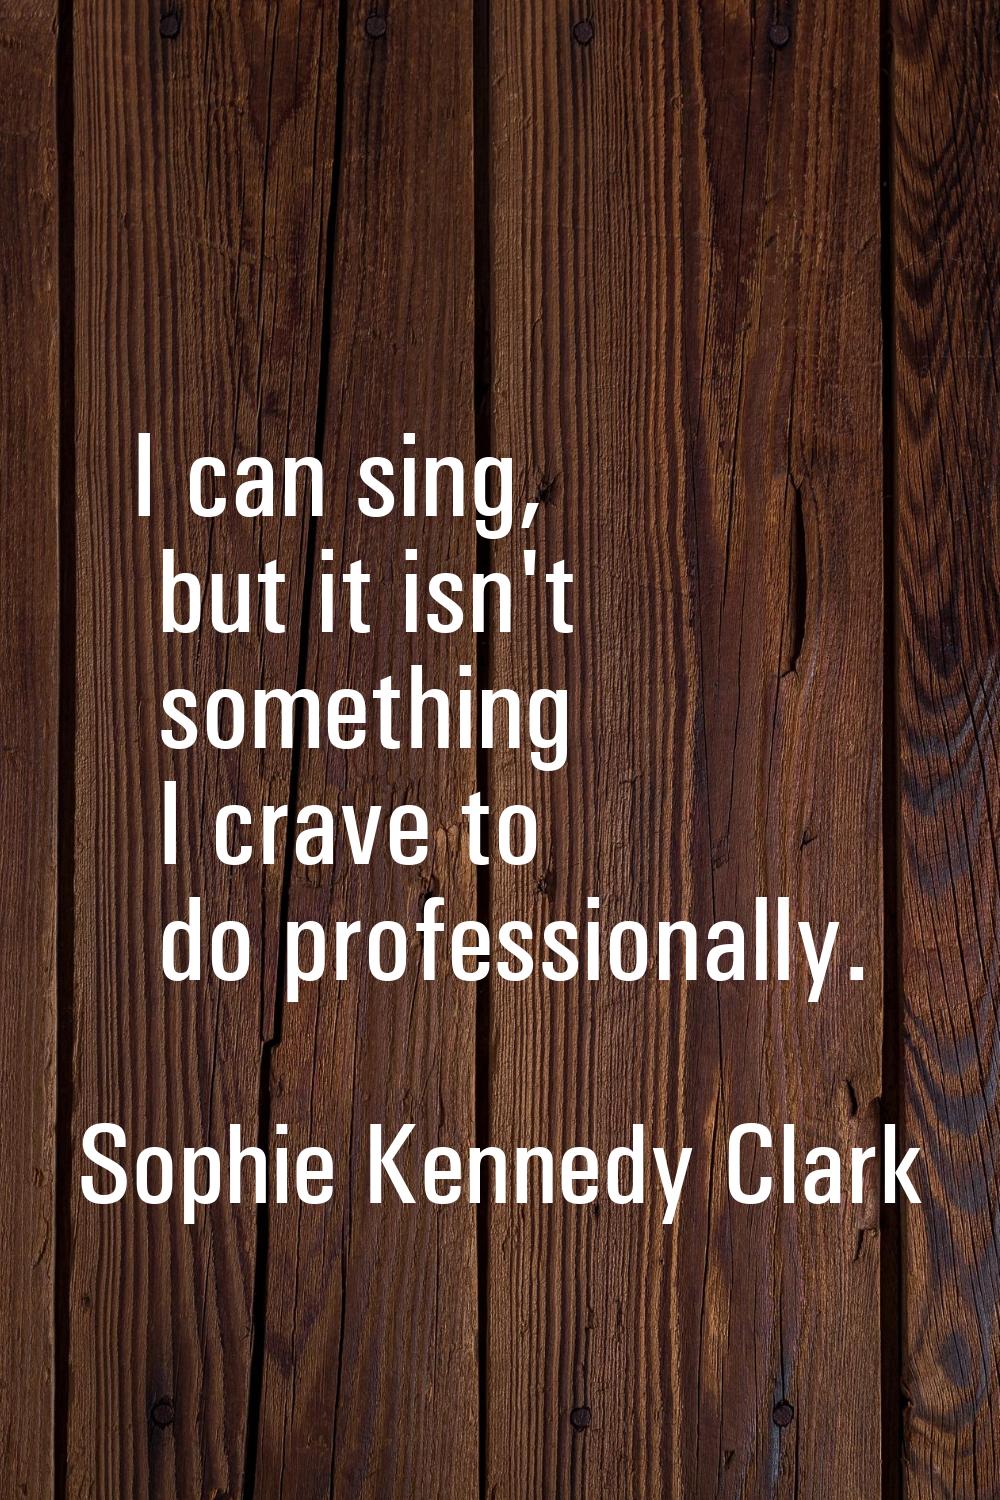 I can sing, but it isn't something I crave to do professionally.